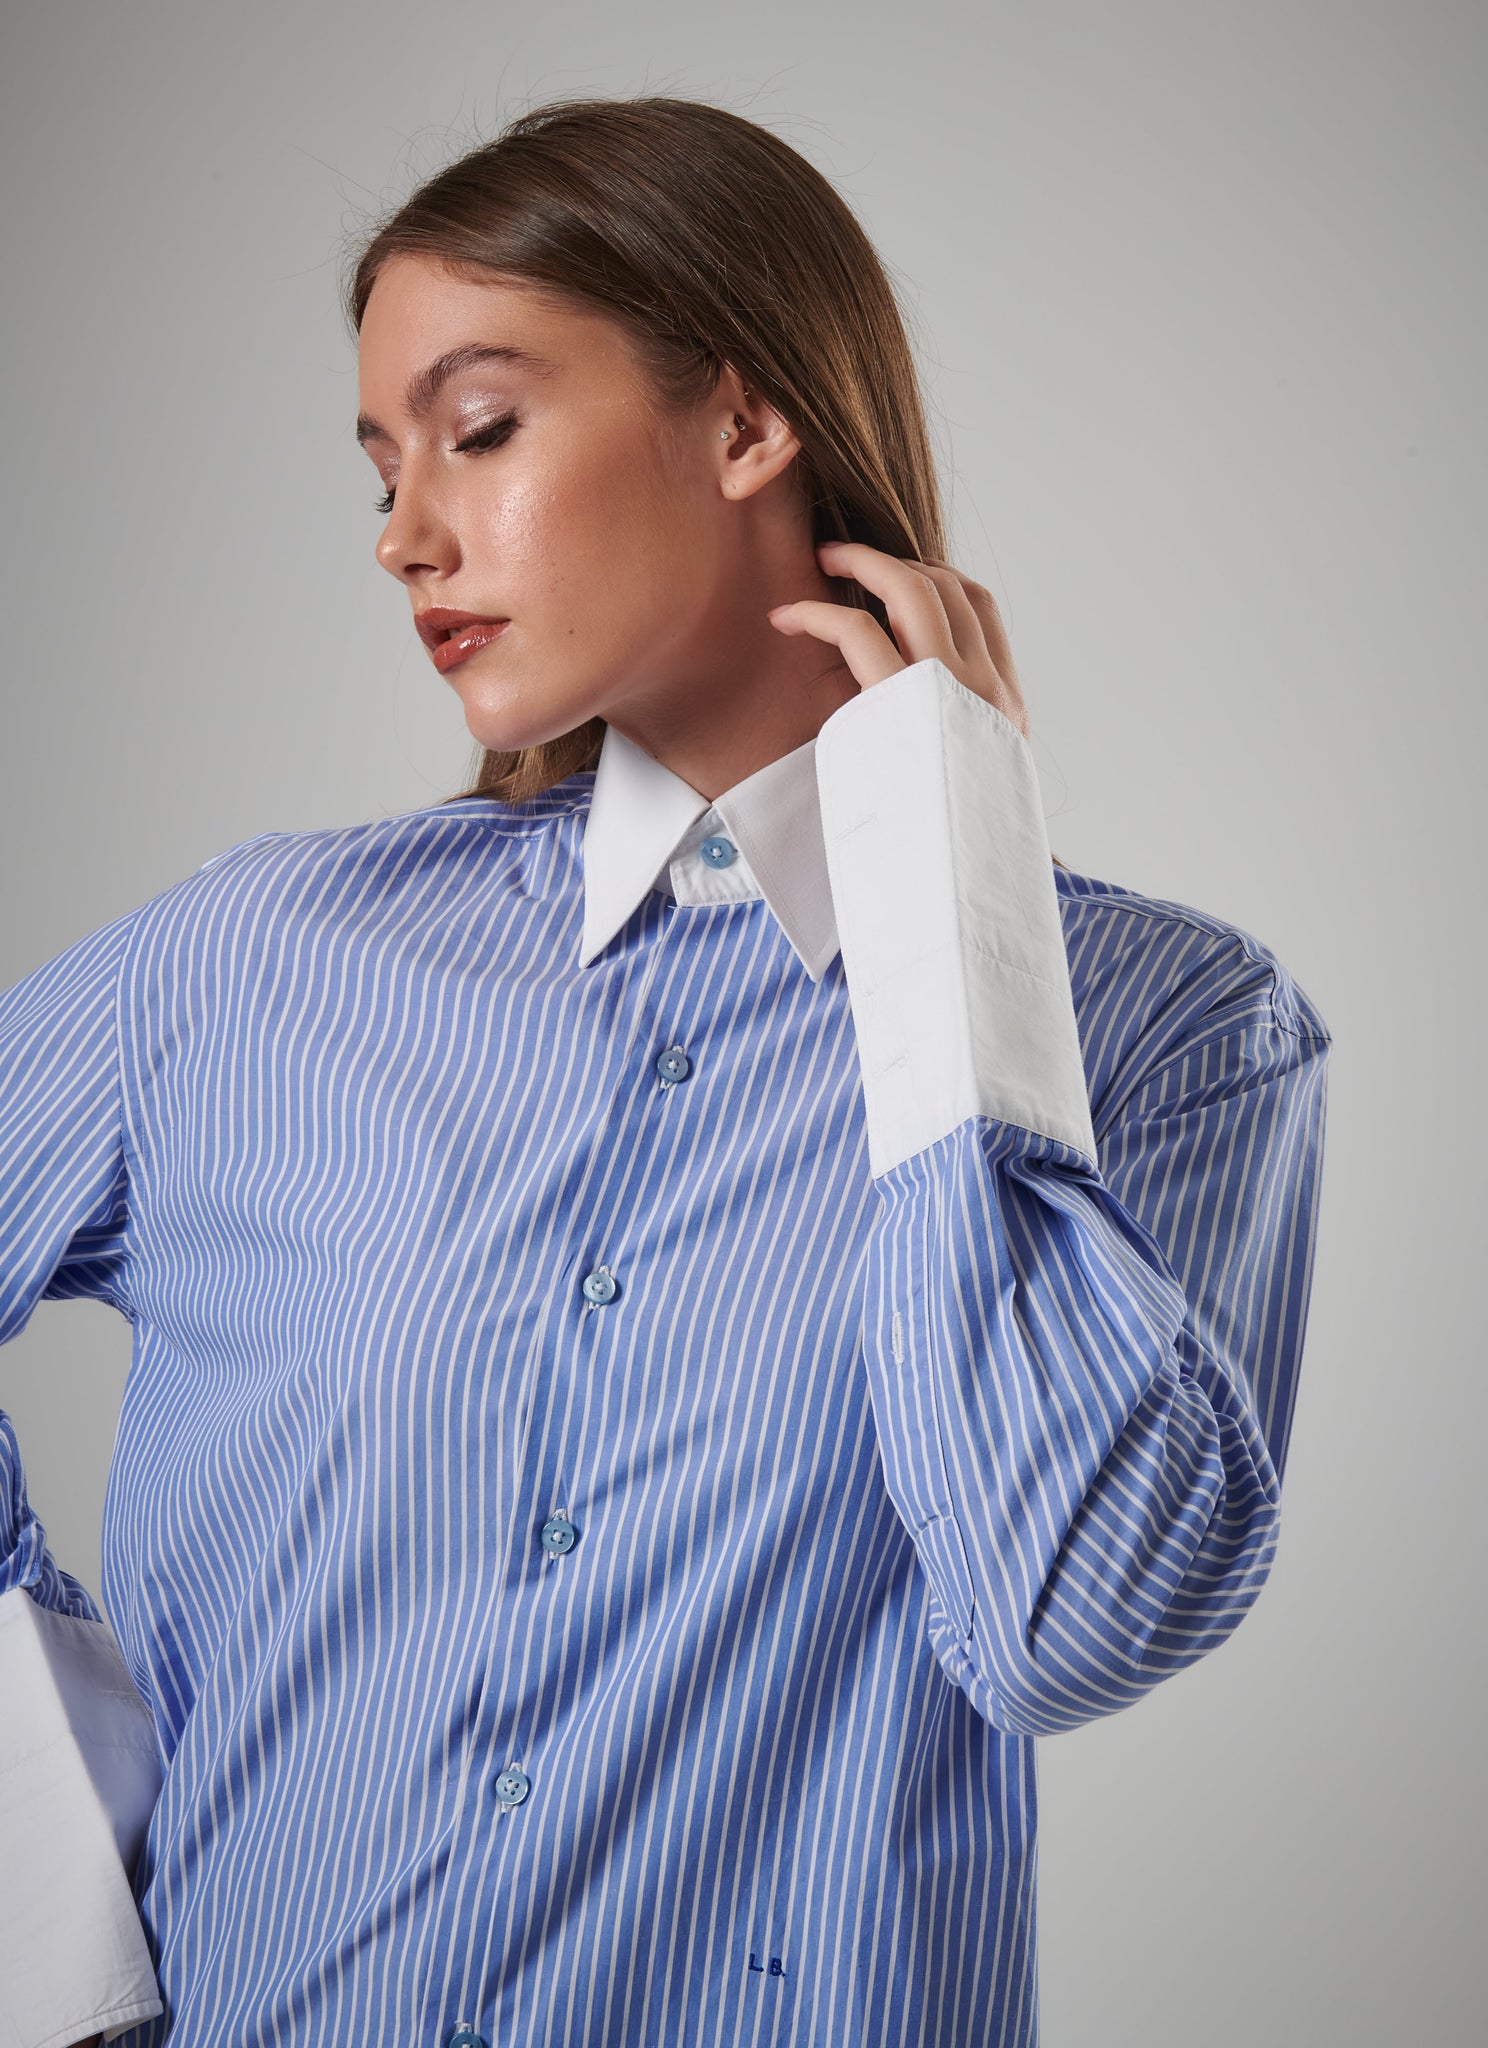 Signature Button-Up in Blue with White Stripes